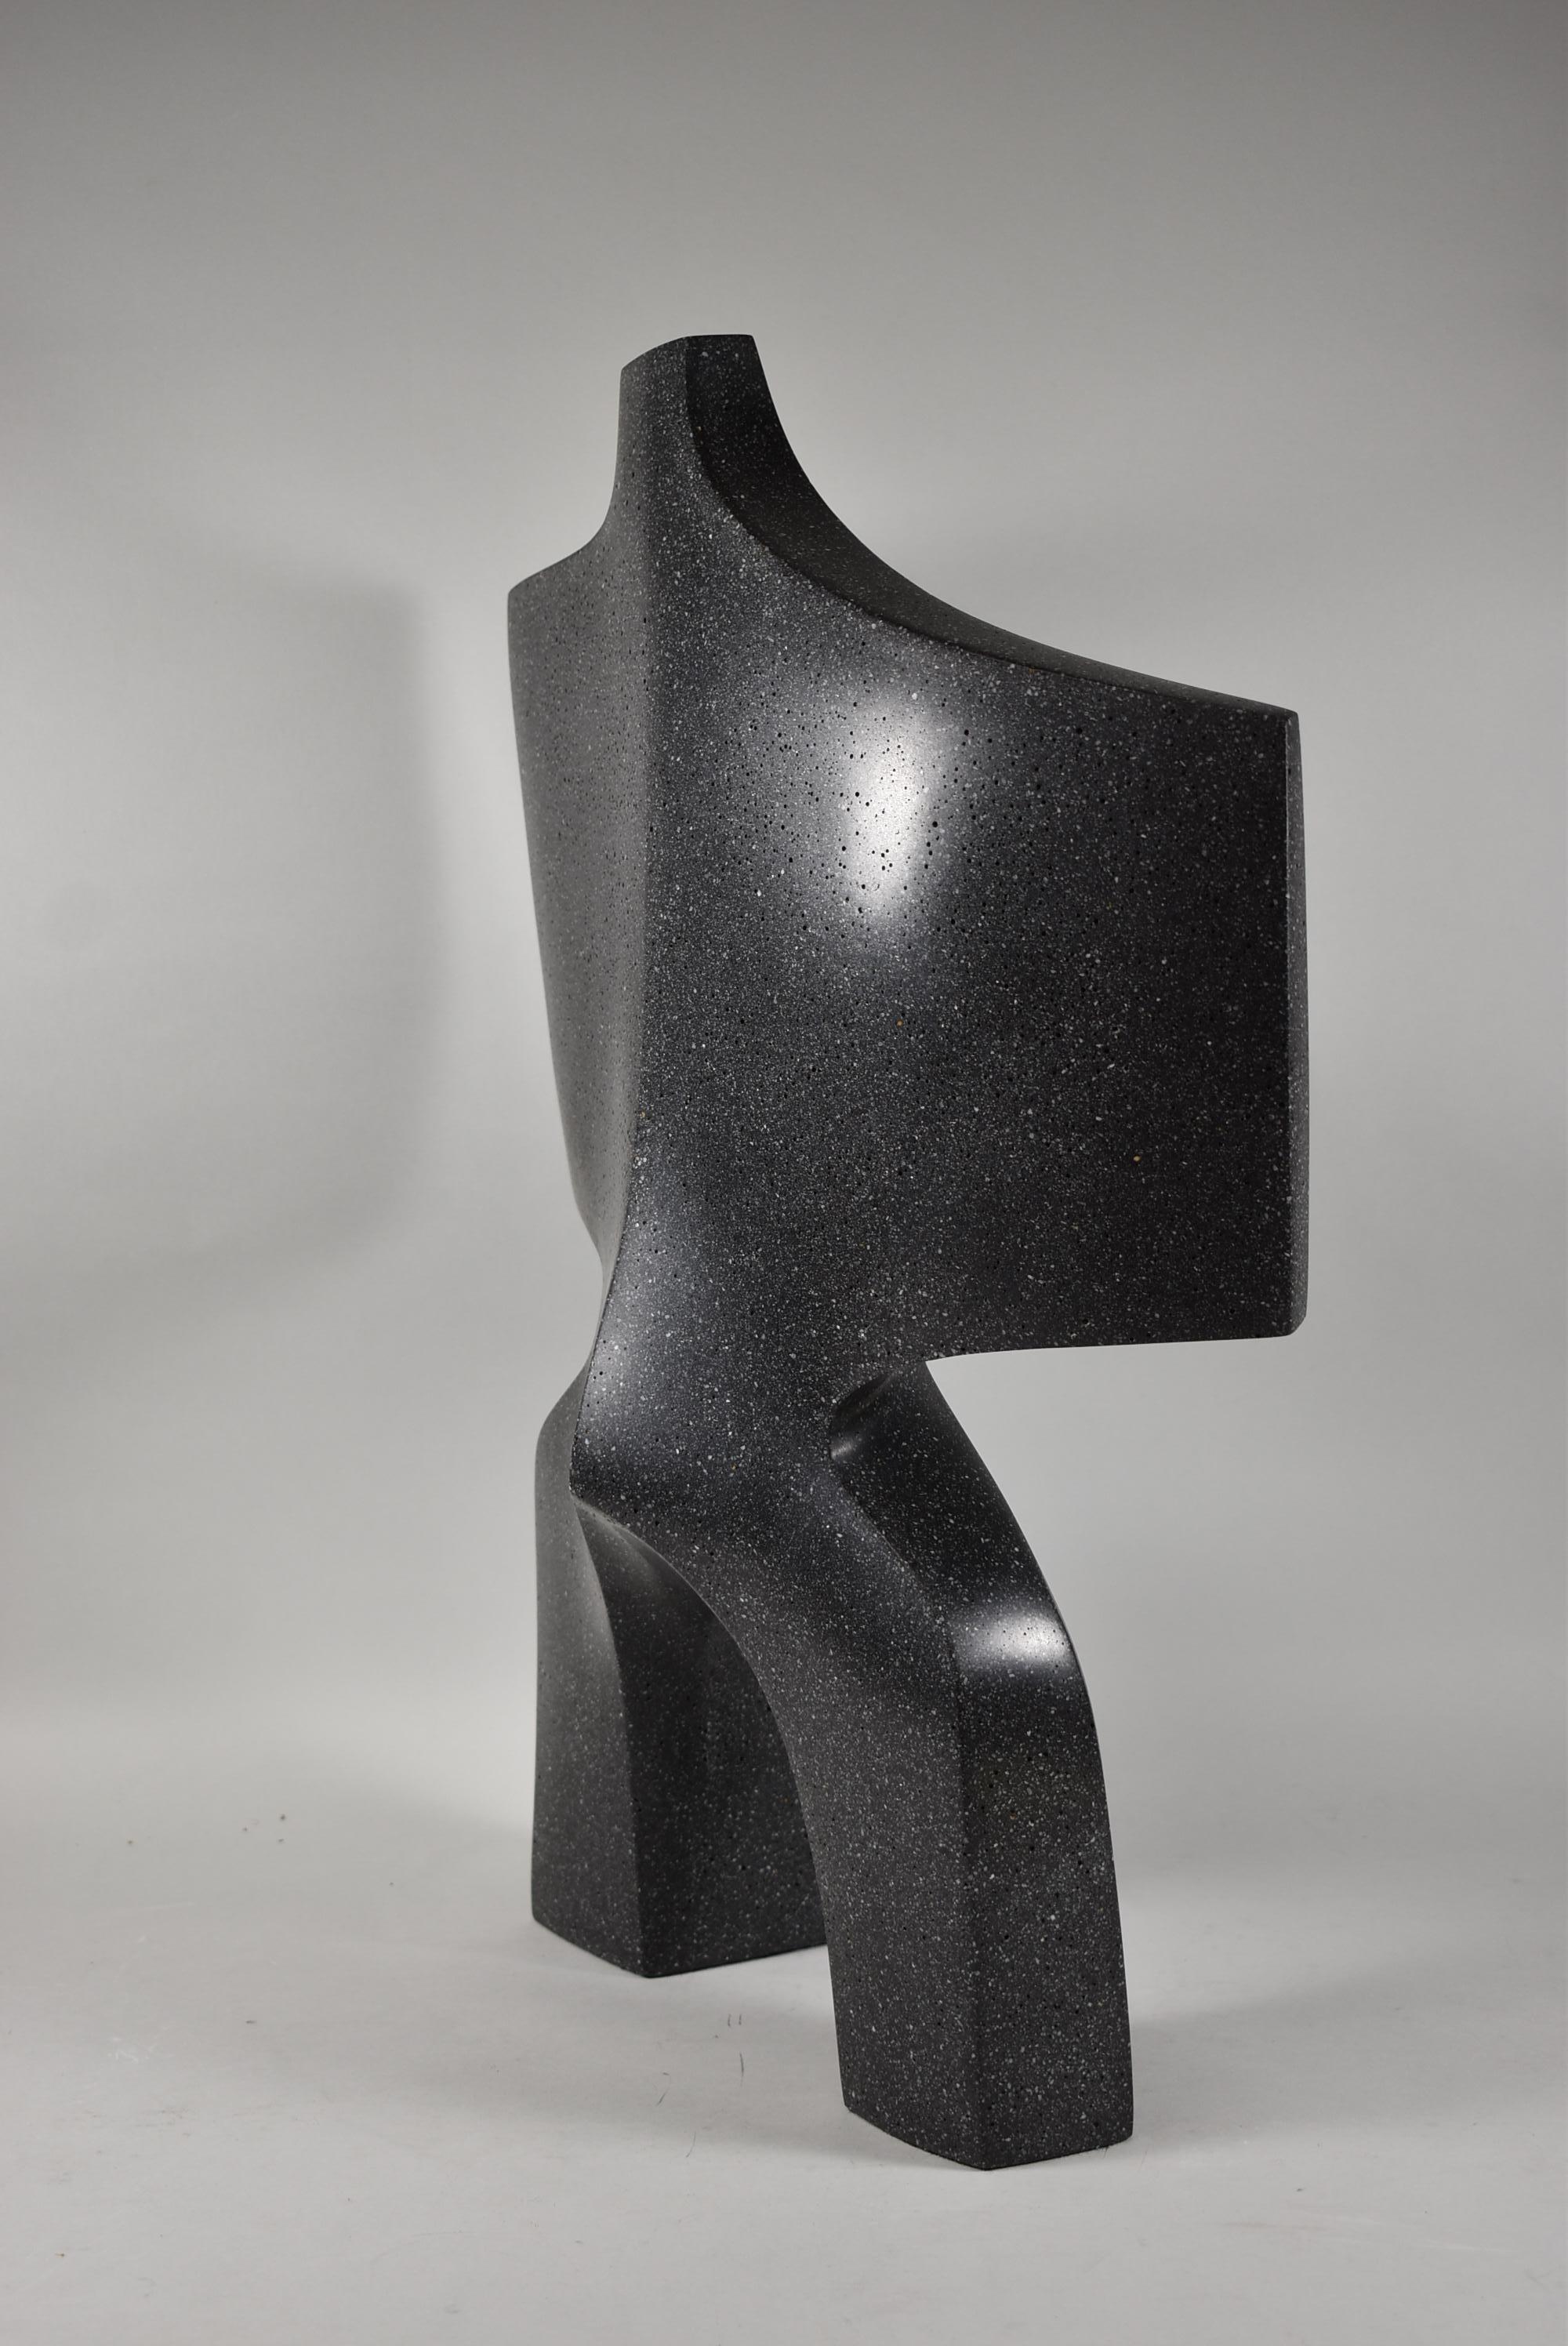 Modern abstract Kuki cast granite sculpture by Masatoyo Kishi. Signed and numbered. Very nice condition, no damage. Dimensions: 4